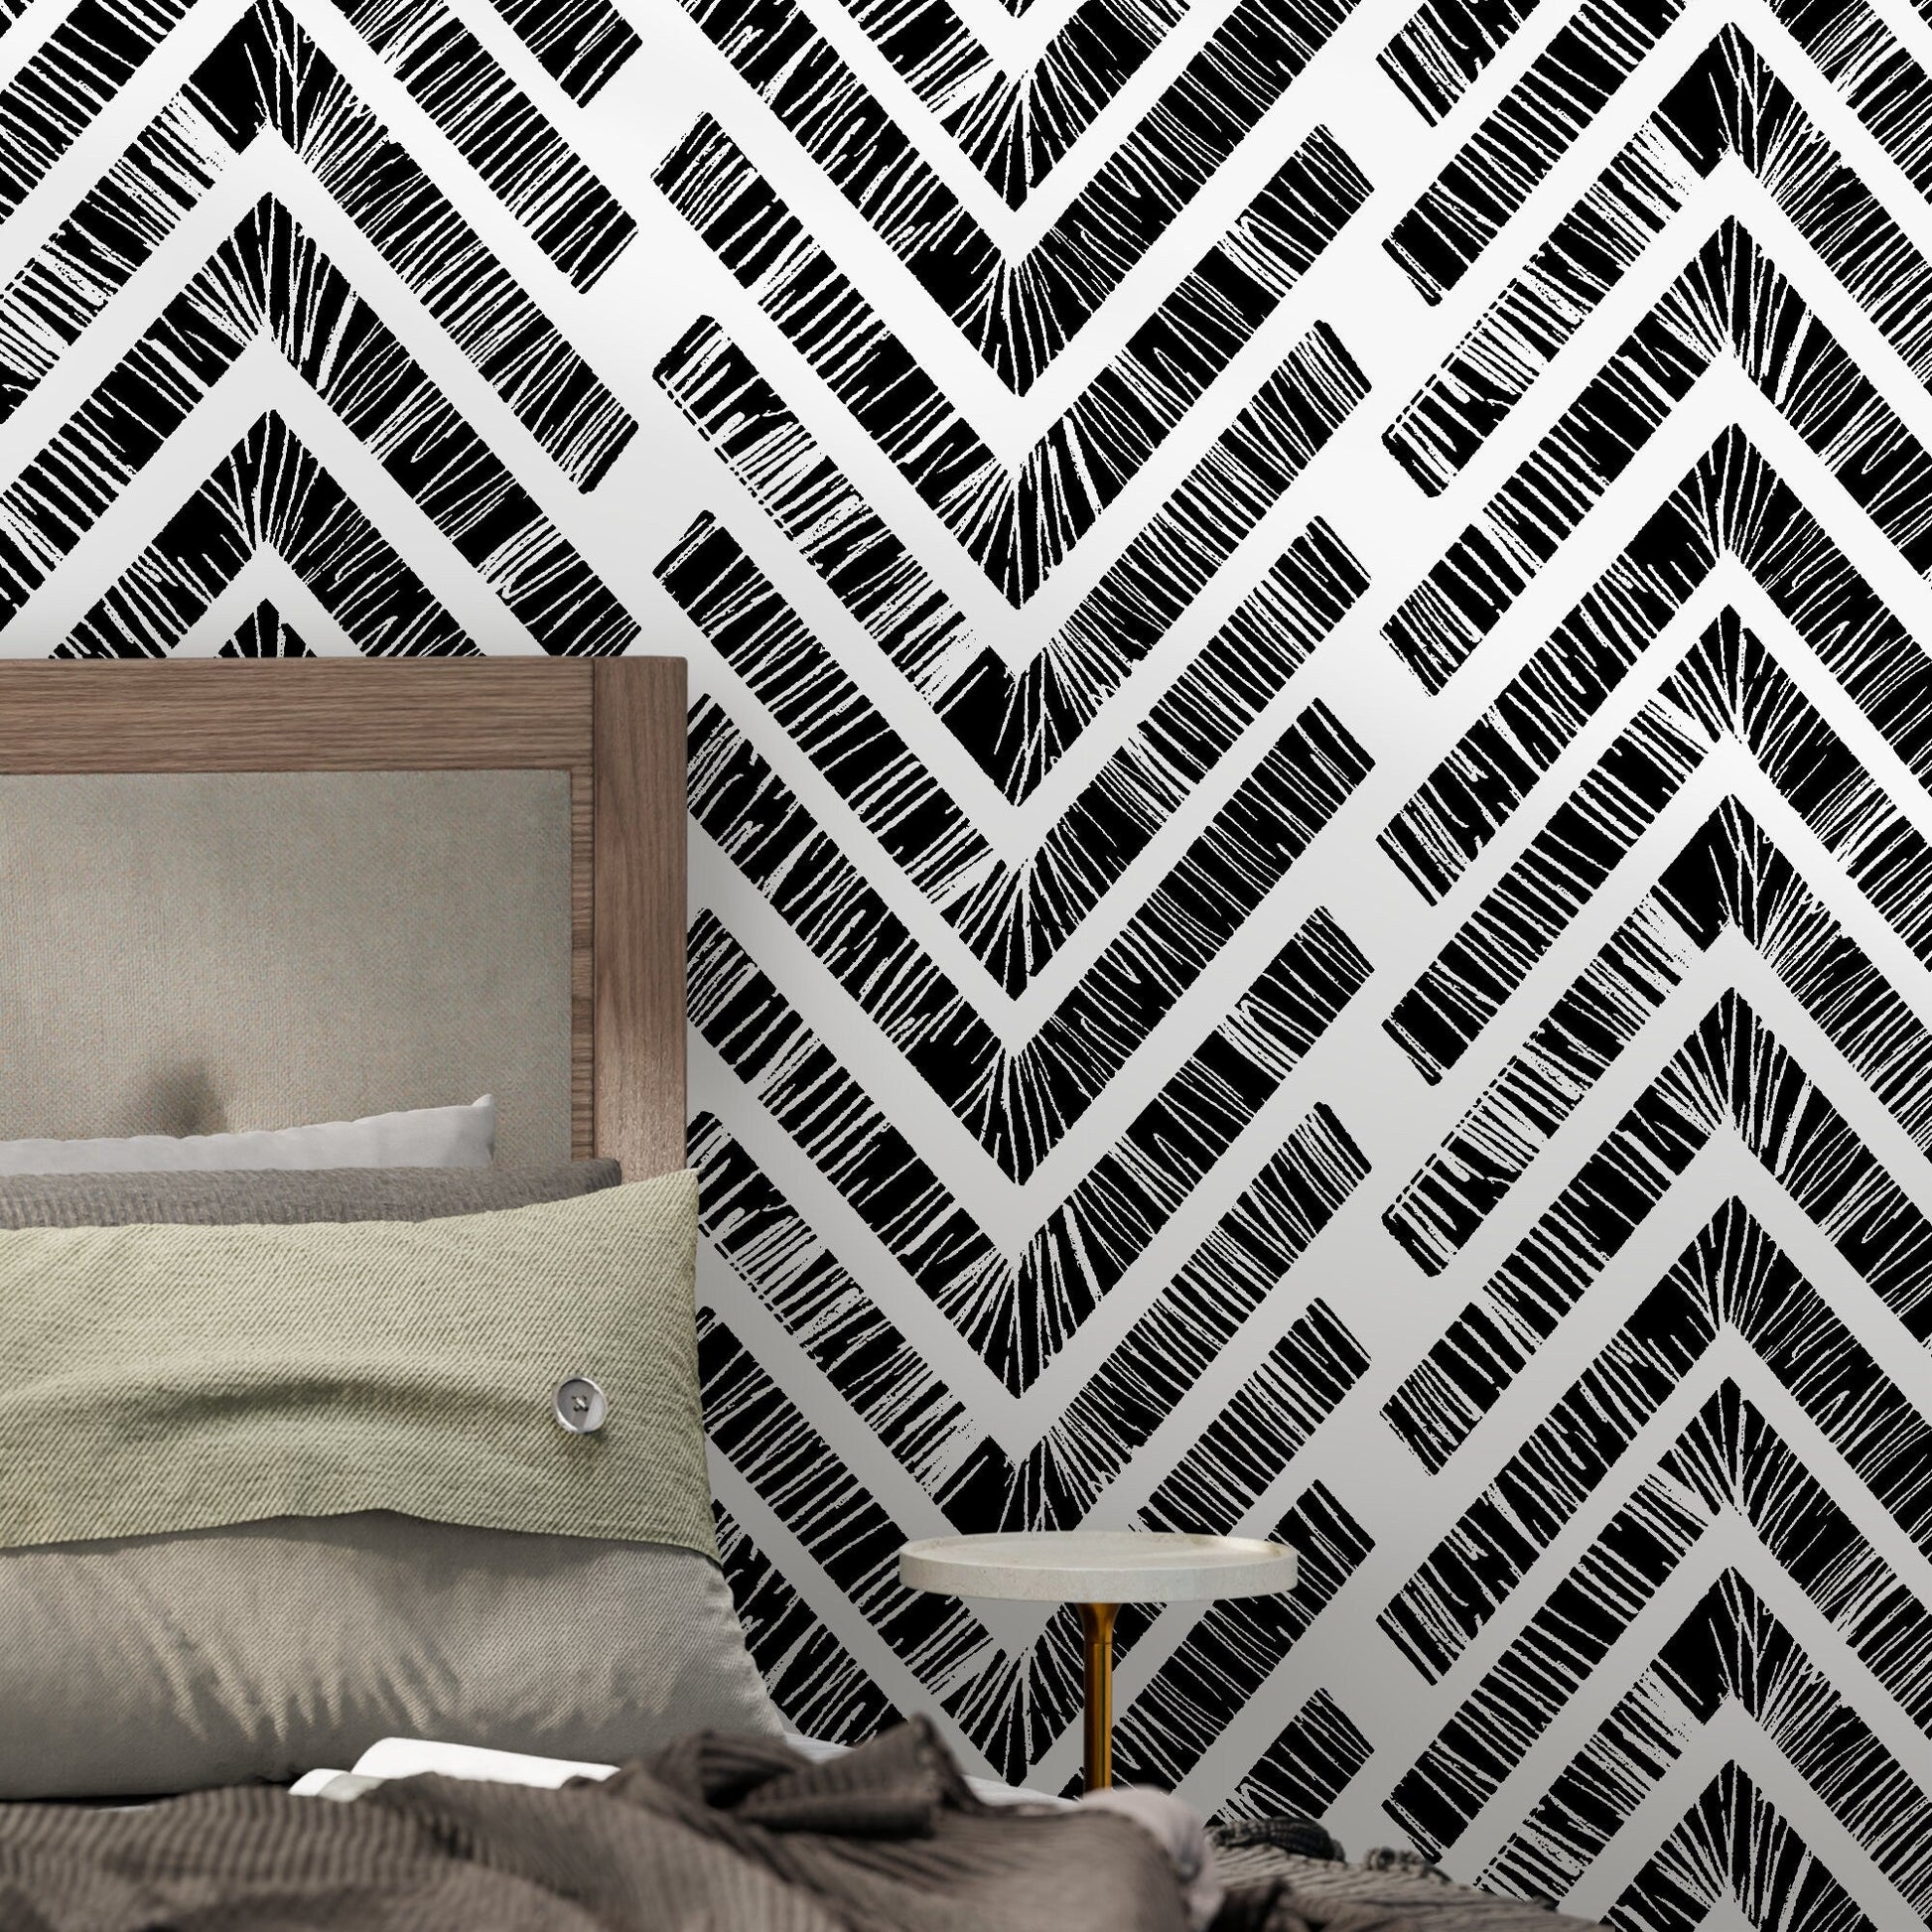 Wallpaper Peel and Stick Wallpaper Removable Wallpaper Home Decor Wall Art Wall Decor Room Decor / Back and White Chevron Wallpaper - C514